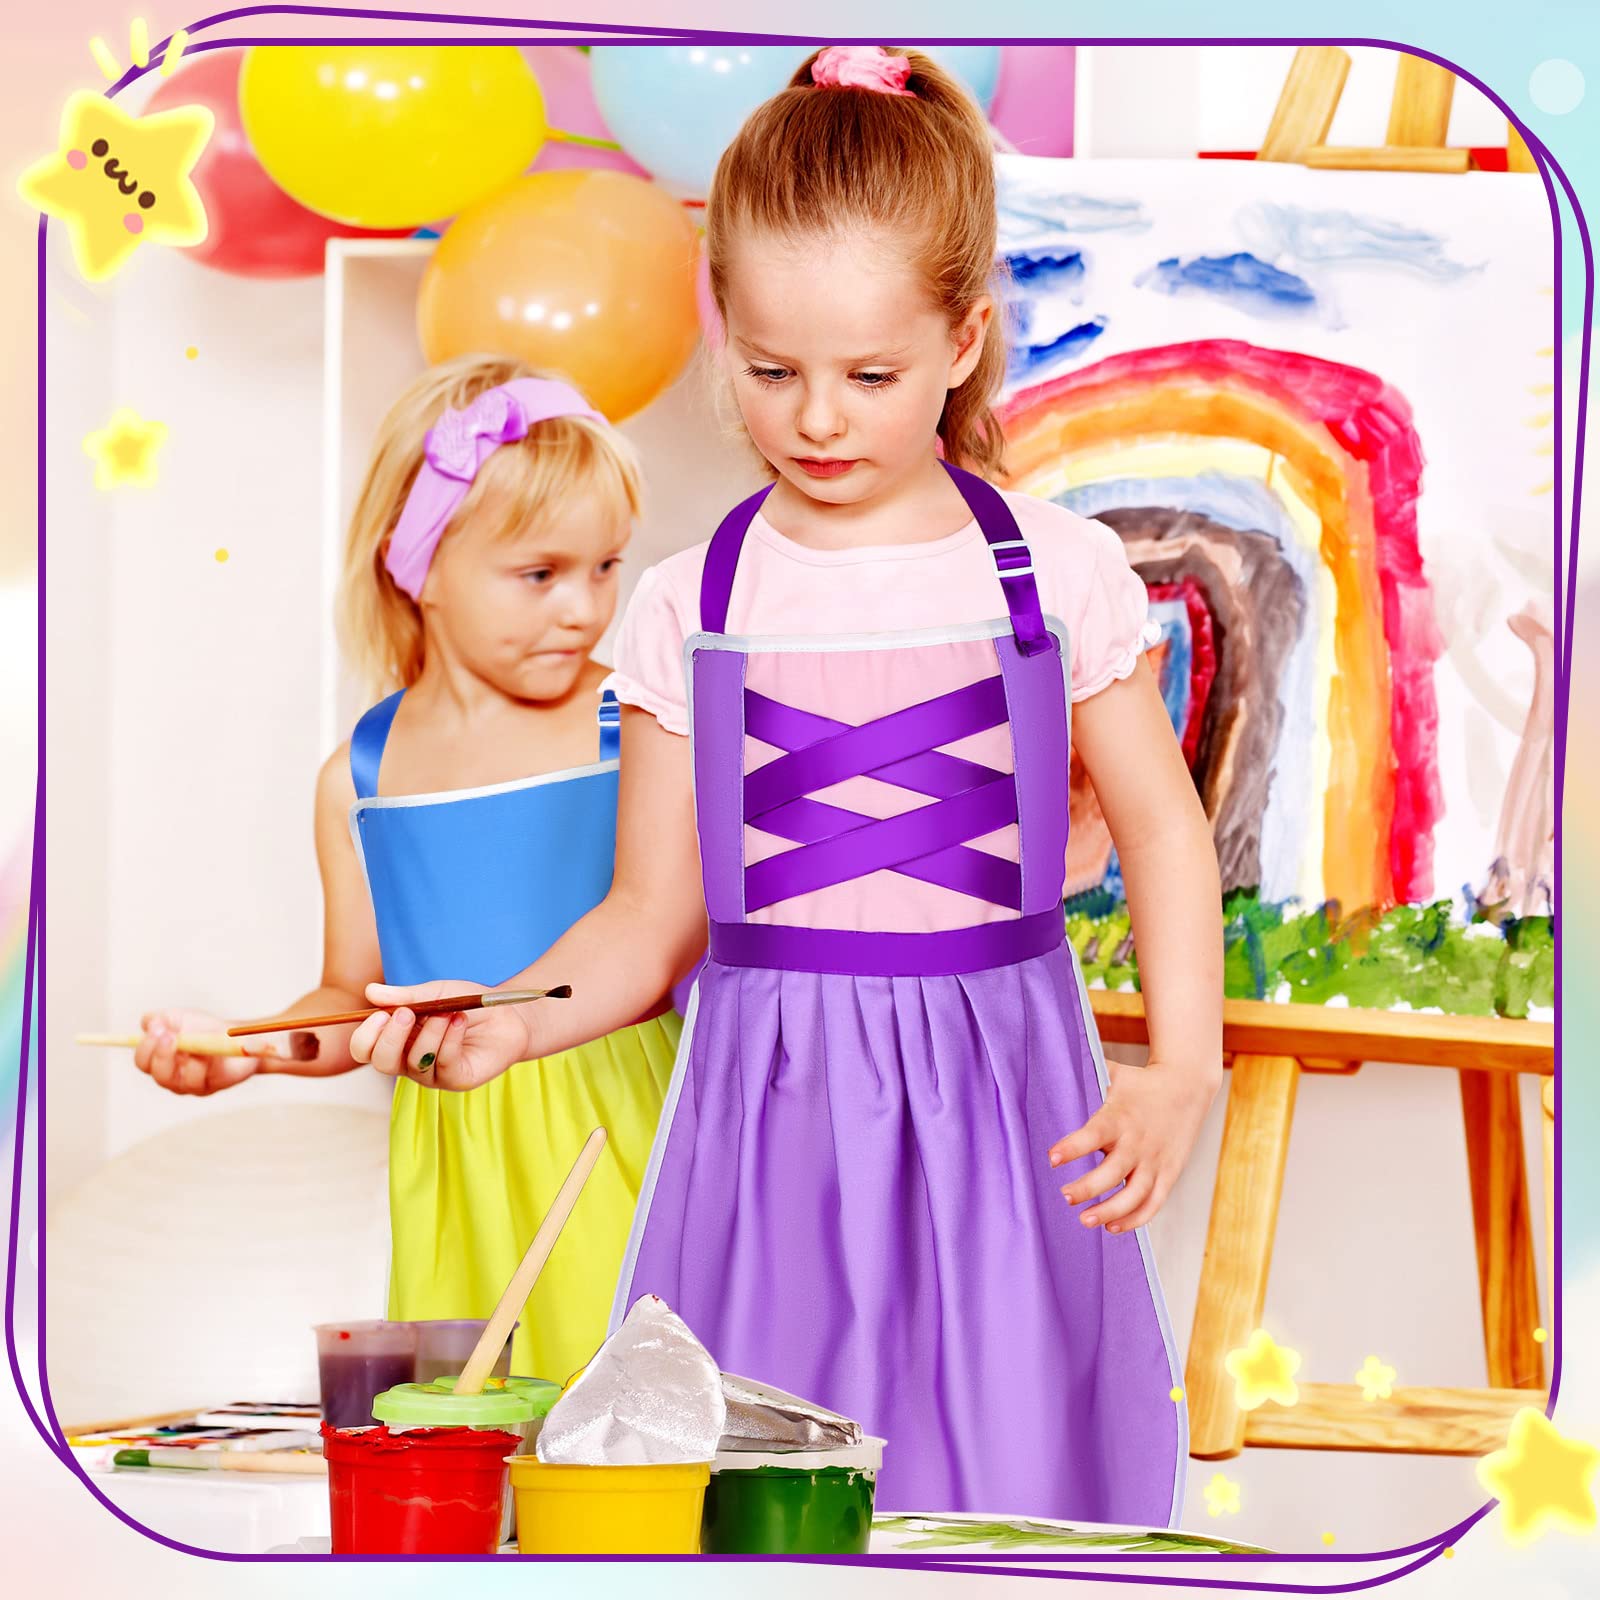 3 Pieces Child Apron for Girls Kid Toddler Aprons Princess Kitchen Chef Apron Art Smock Adjustable Cute Apron for Artist Painting Cooking Baking Gardening Kitchen Supplies, Yellow Purple White Blue